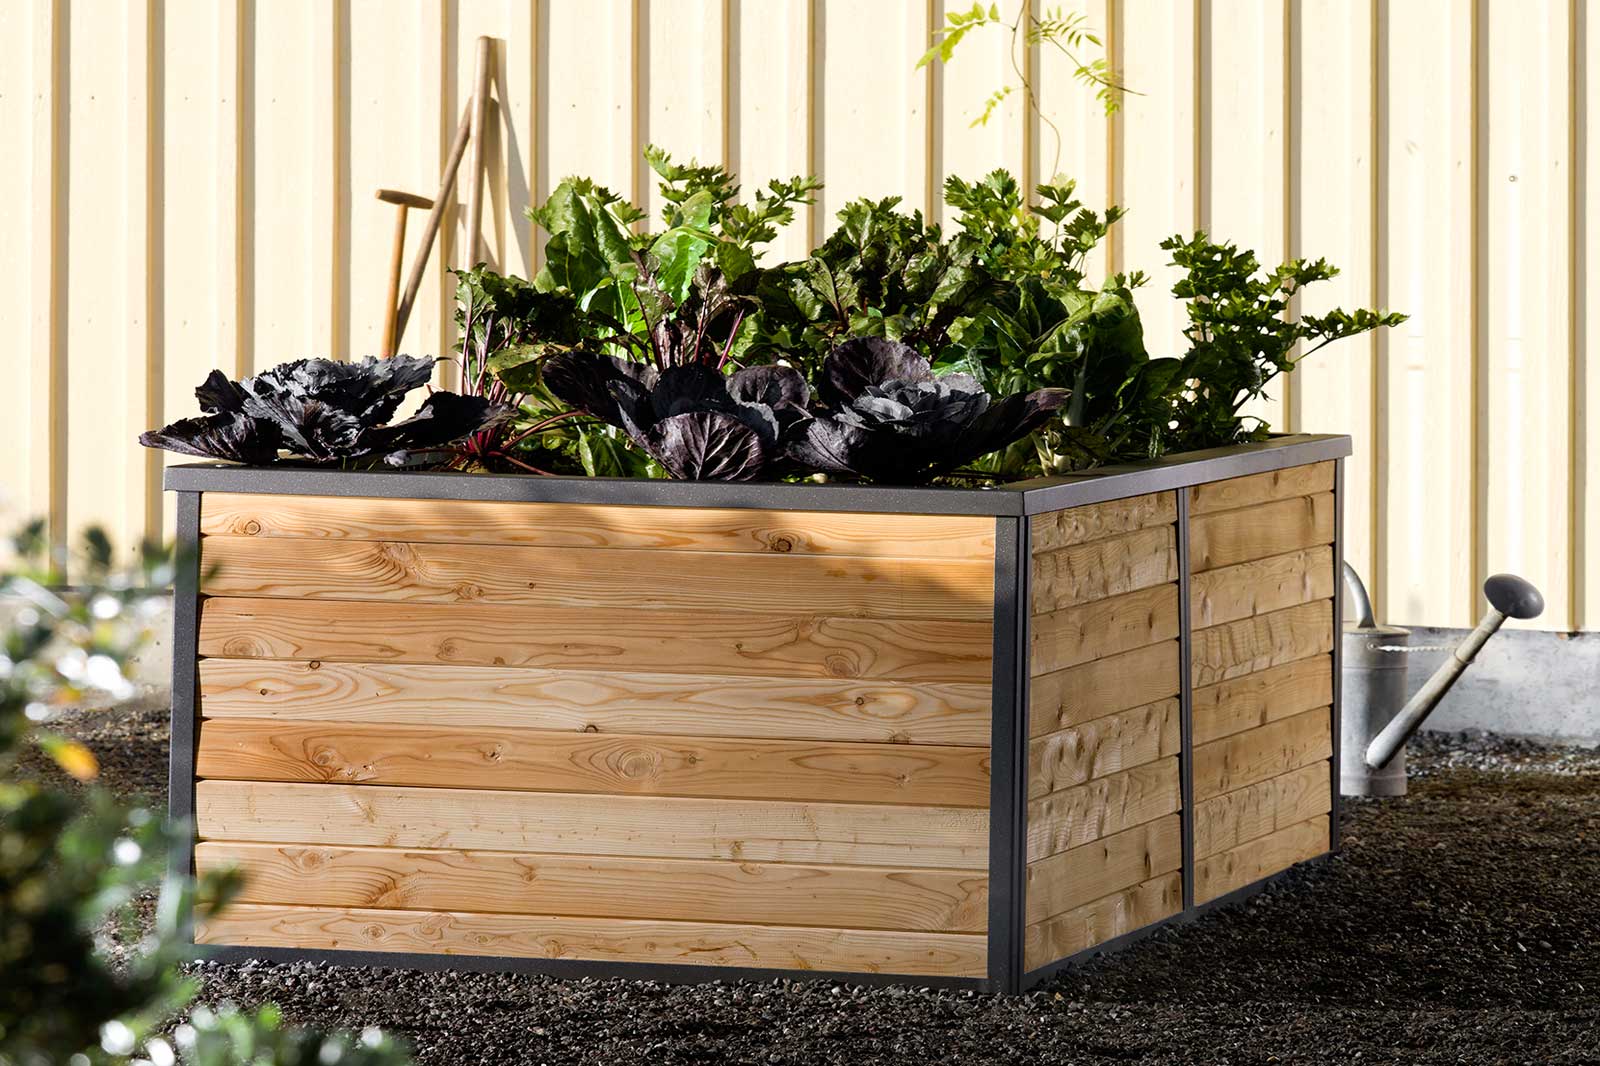 Sager Gartengalerie AG has developed raised beds for use in the garden for balcony